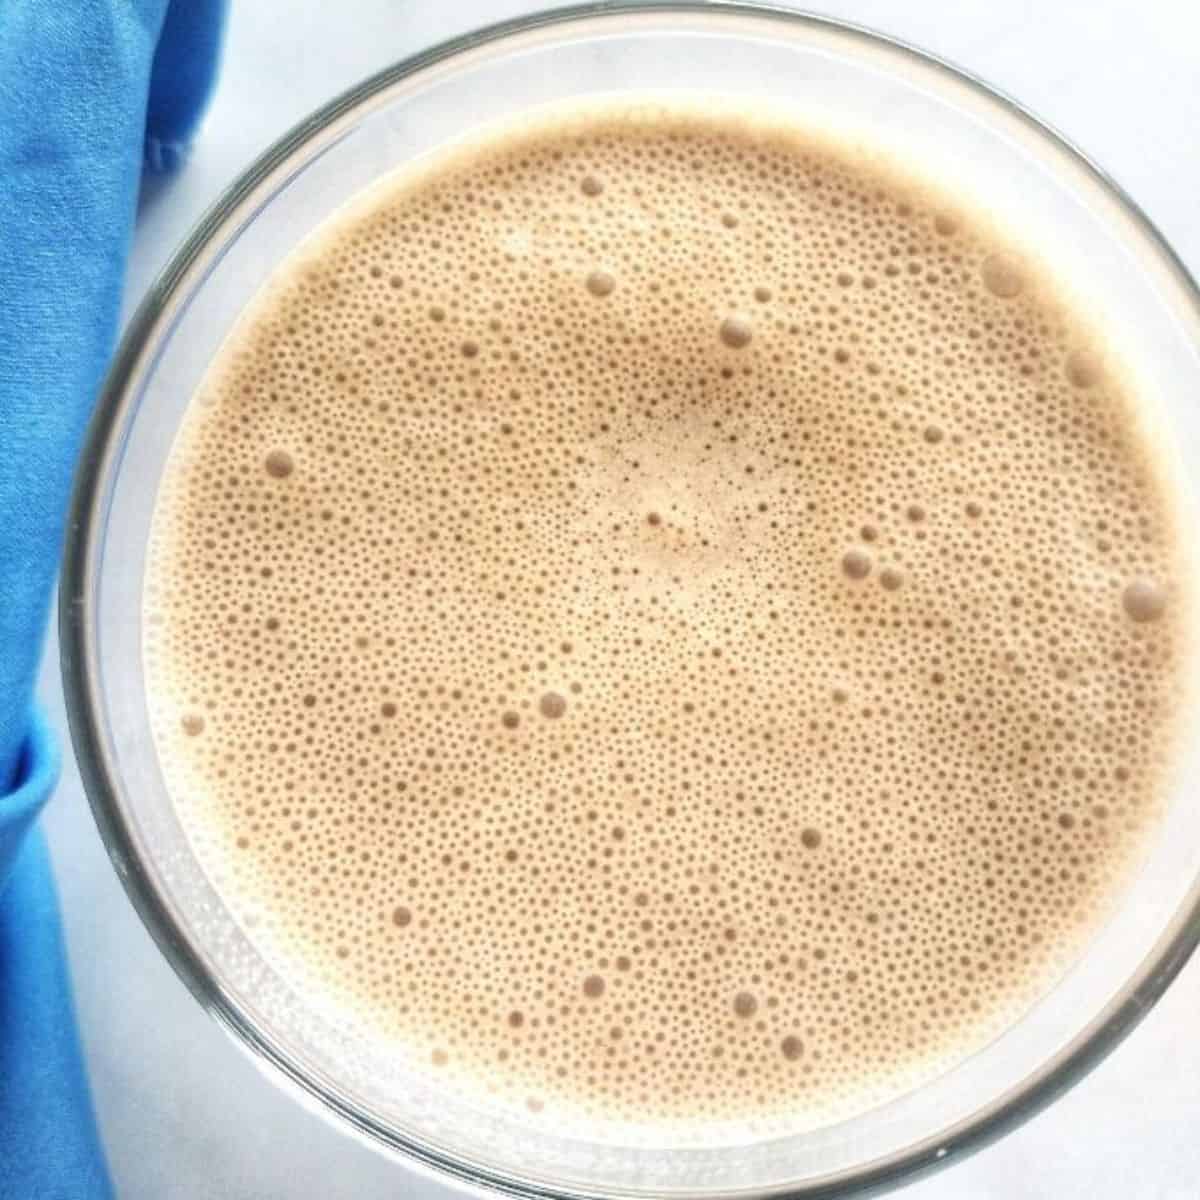 6 - Easy Keto Chocolate Milk with 3 Ingredients